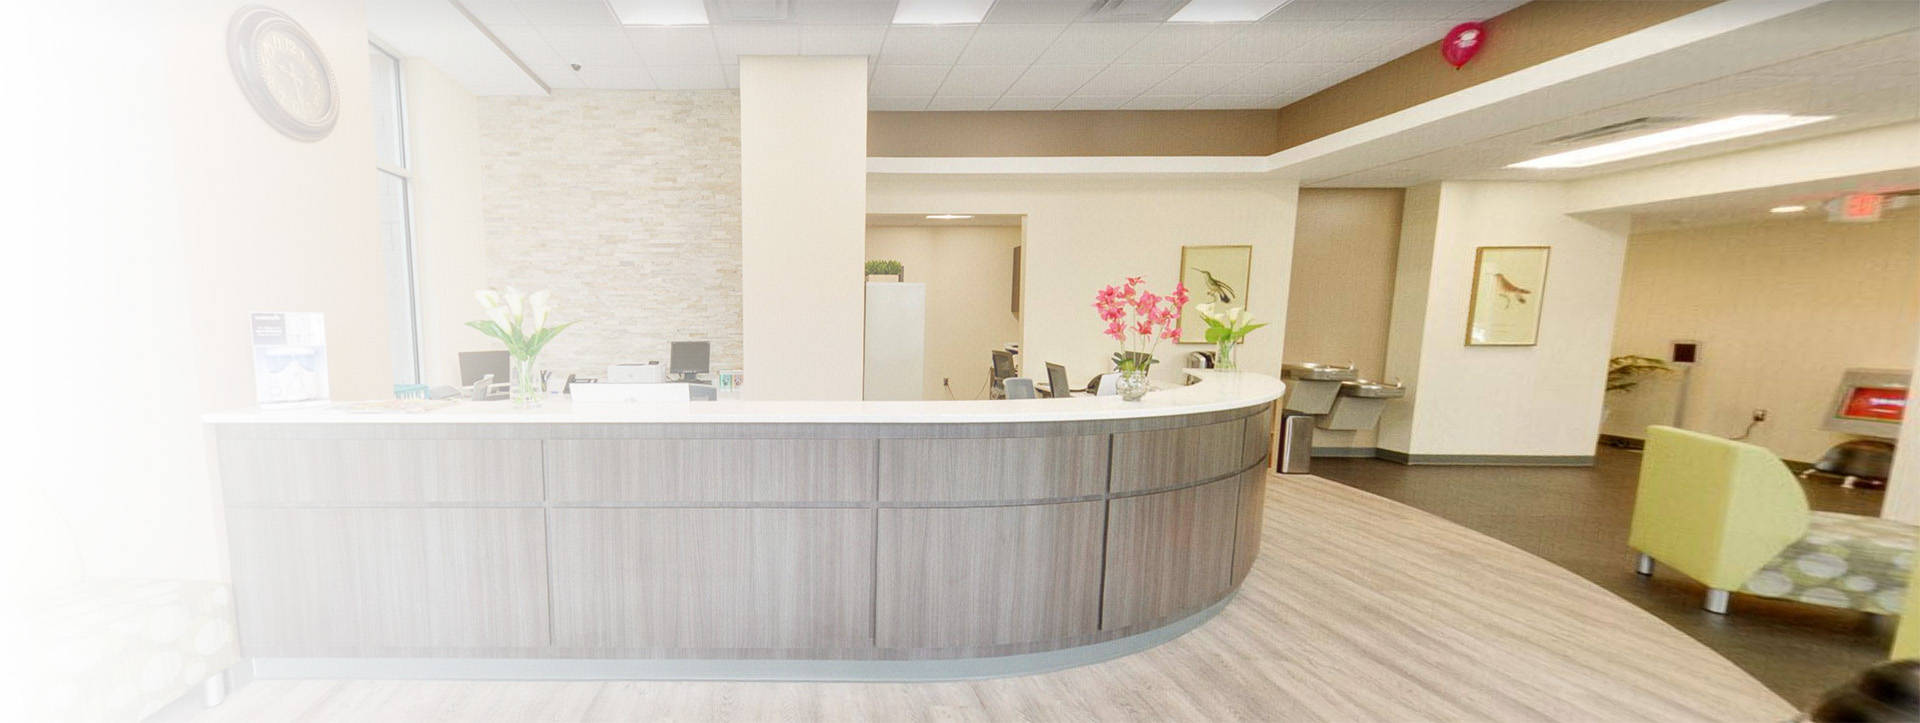 The image shows an interior view of a modern lobby or waiting area within a building, featuring a reception desk with a curved countertop, a seating area with a large window, and a contemporary design with neutral colors.